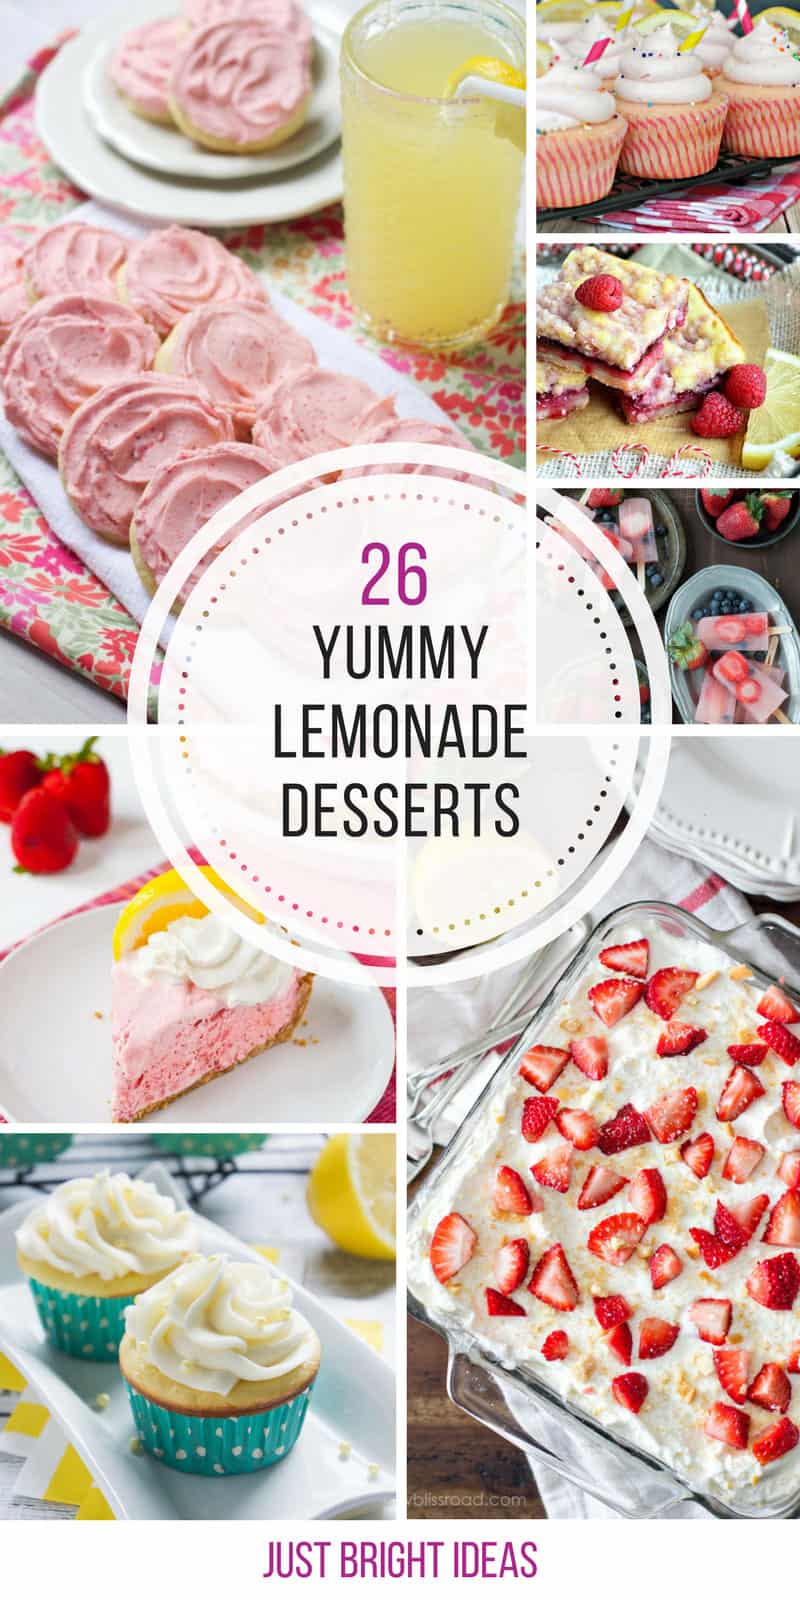 Oh my these lemonade dessert recipes are amazing! Thanks for sharing!